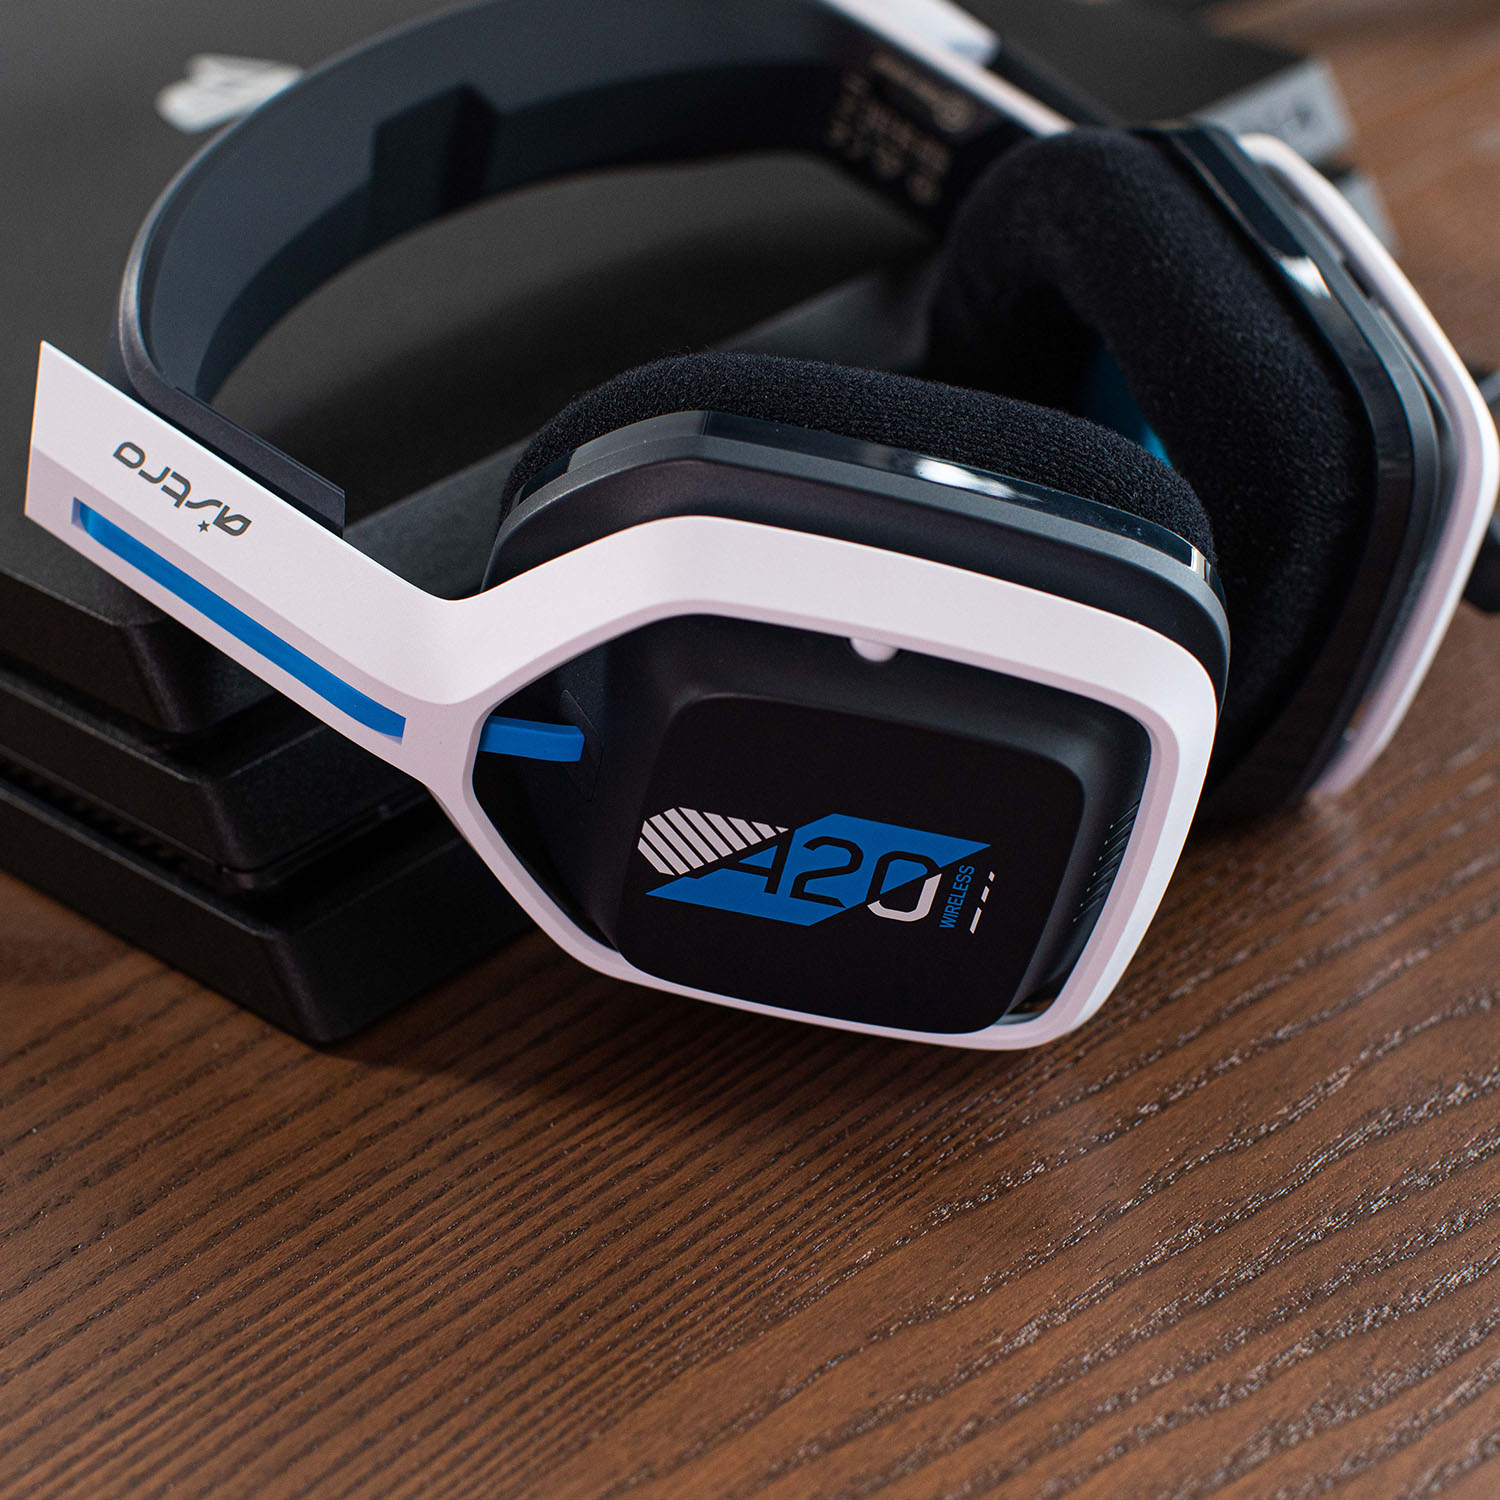 Astro Gaming A20 Wireless Gen 2 Headset Review - Game Freaks 365